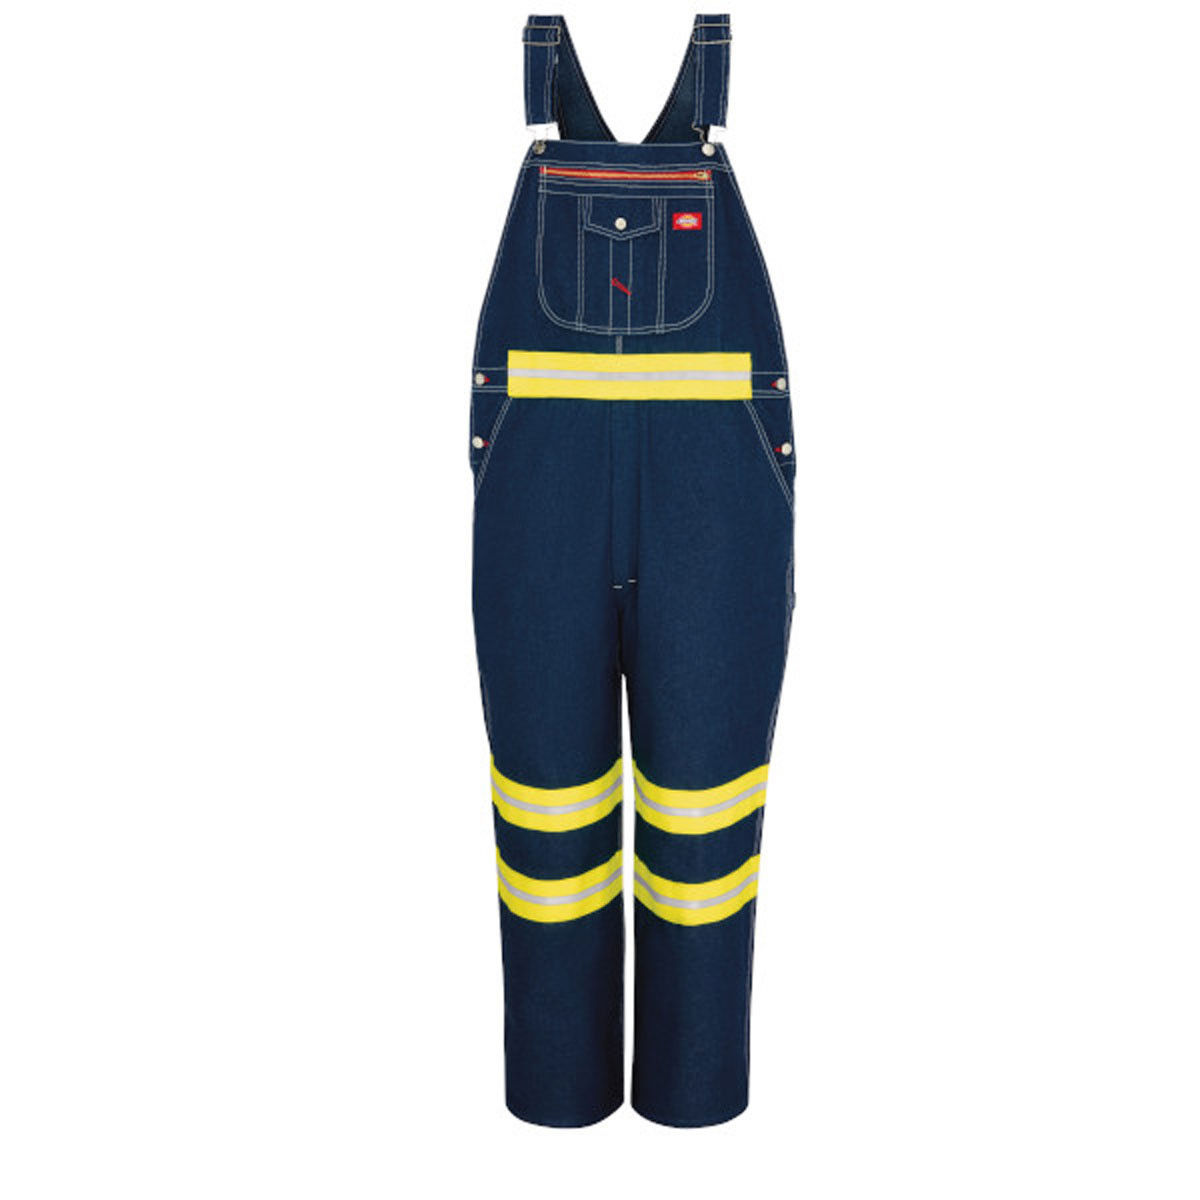 Does the Dickiese overall protect against any specific hazards?